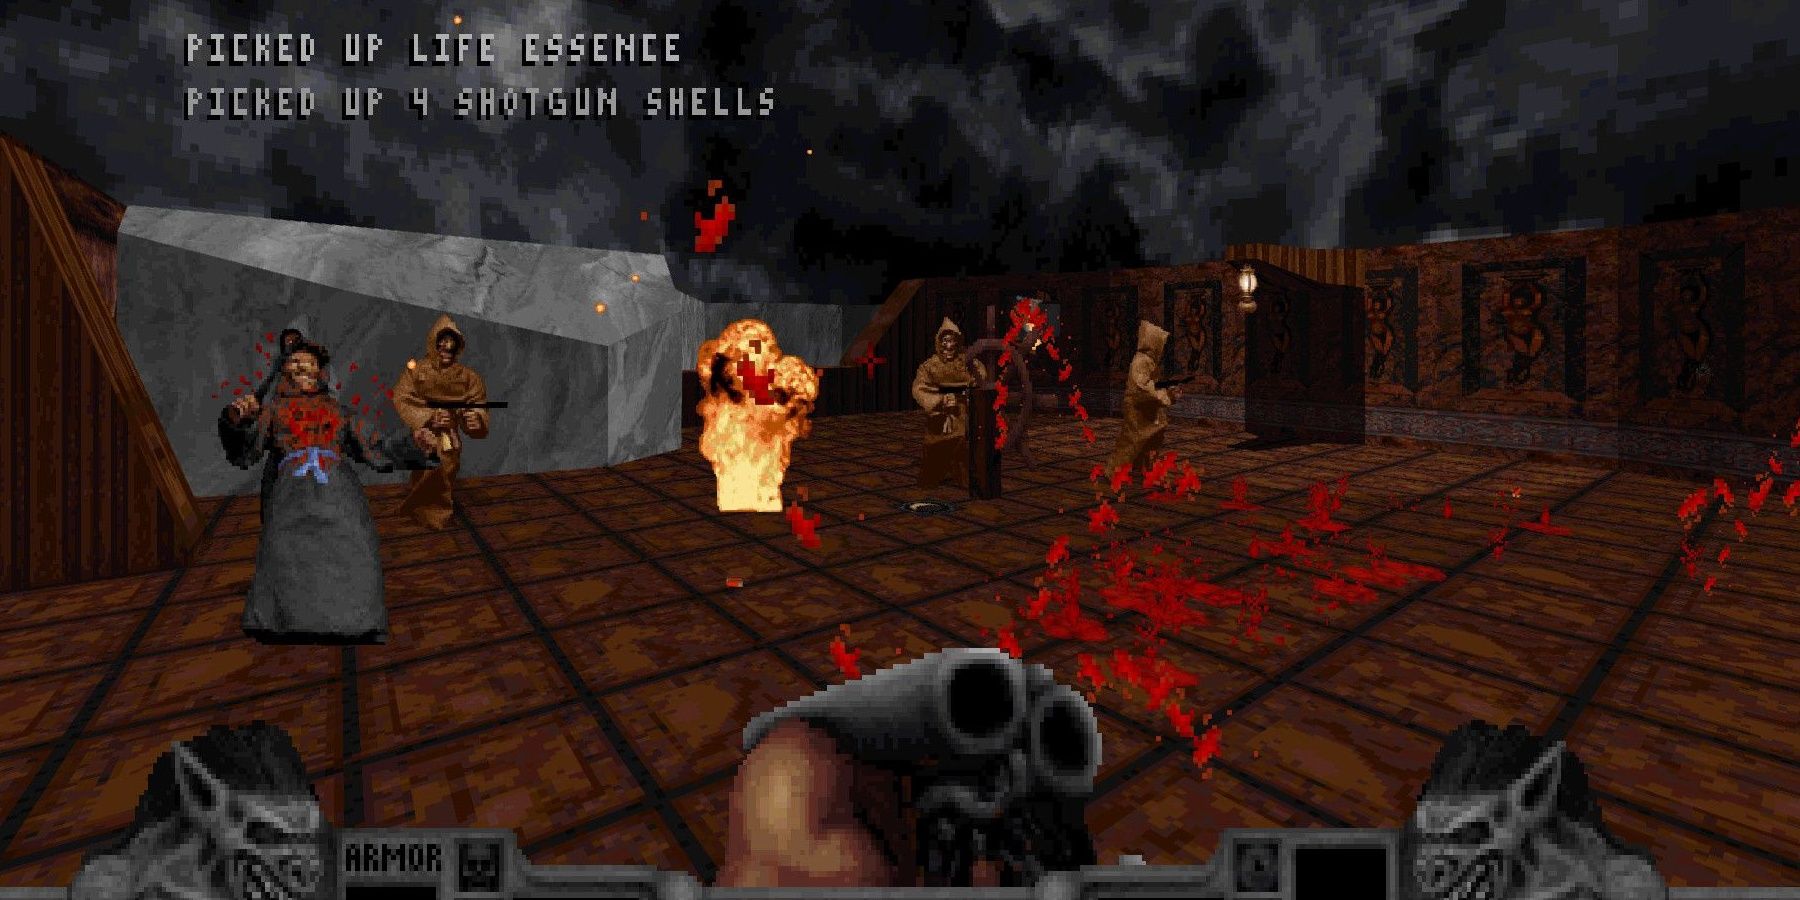 Blood 1997 player reloading a Shotgun surrounded by enemies, one of which is on fire